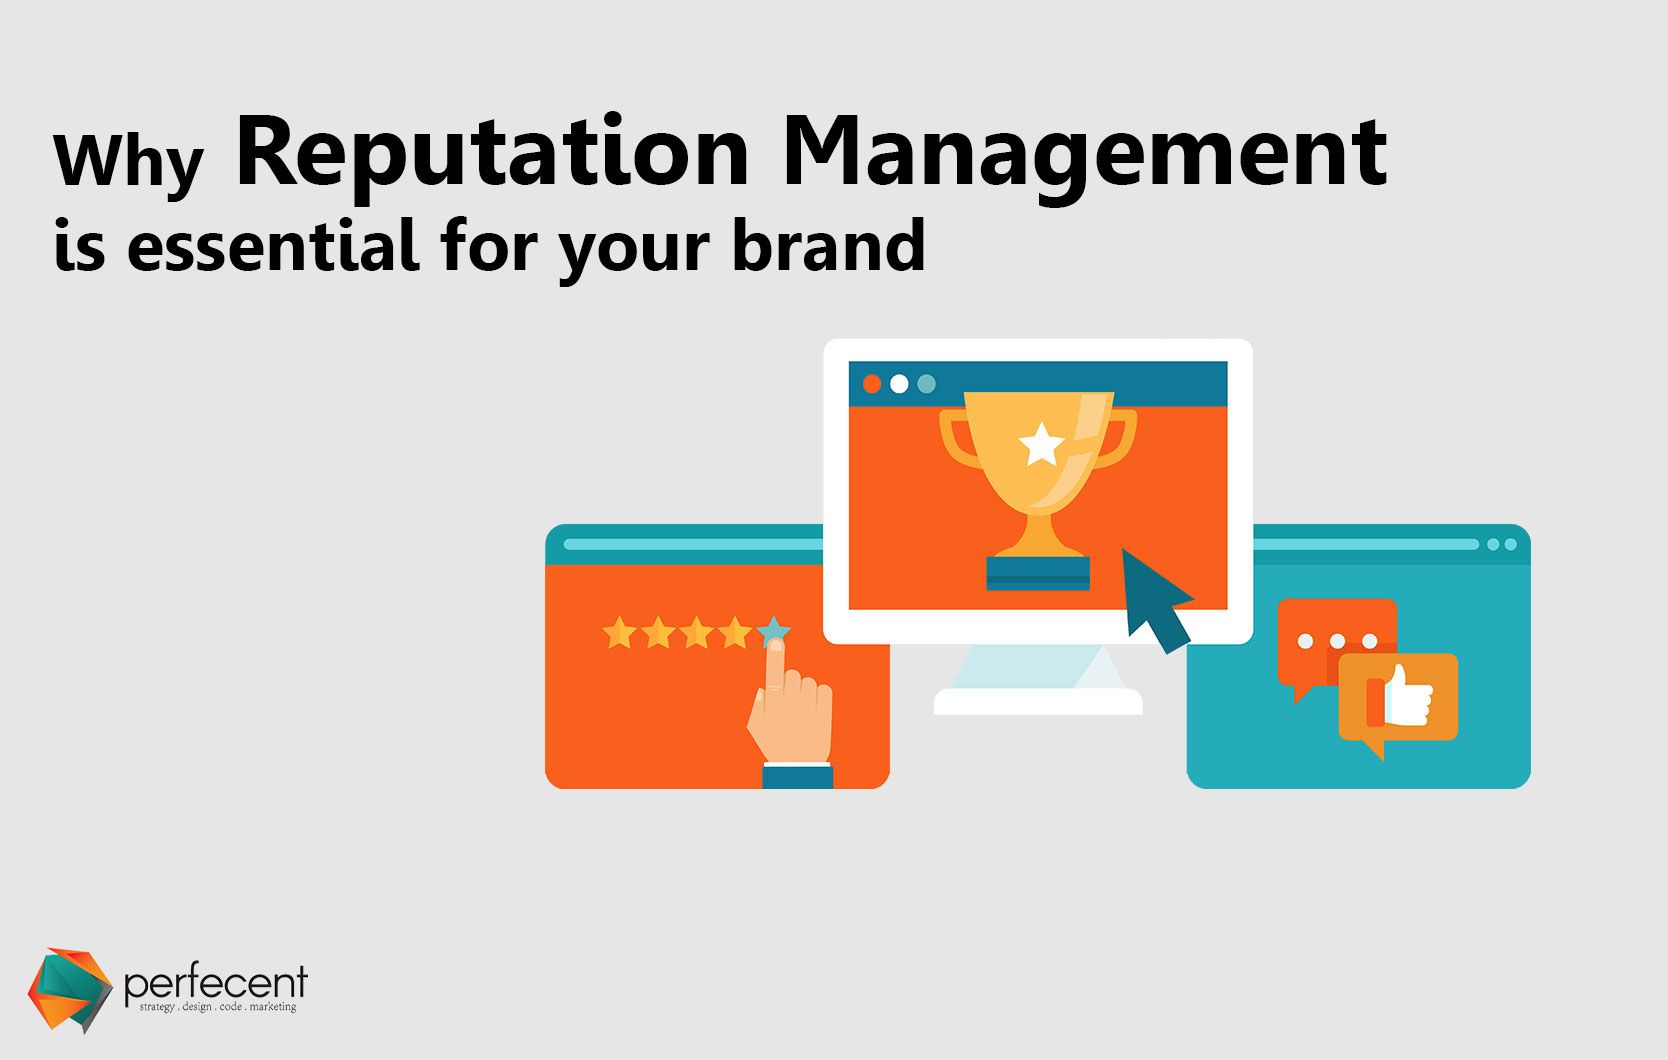 Here is Why Social Media Reputation Management is Important